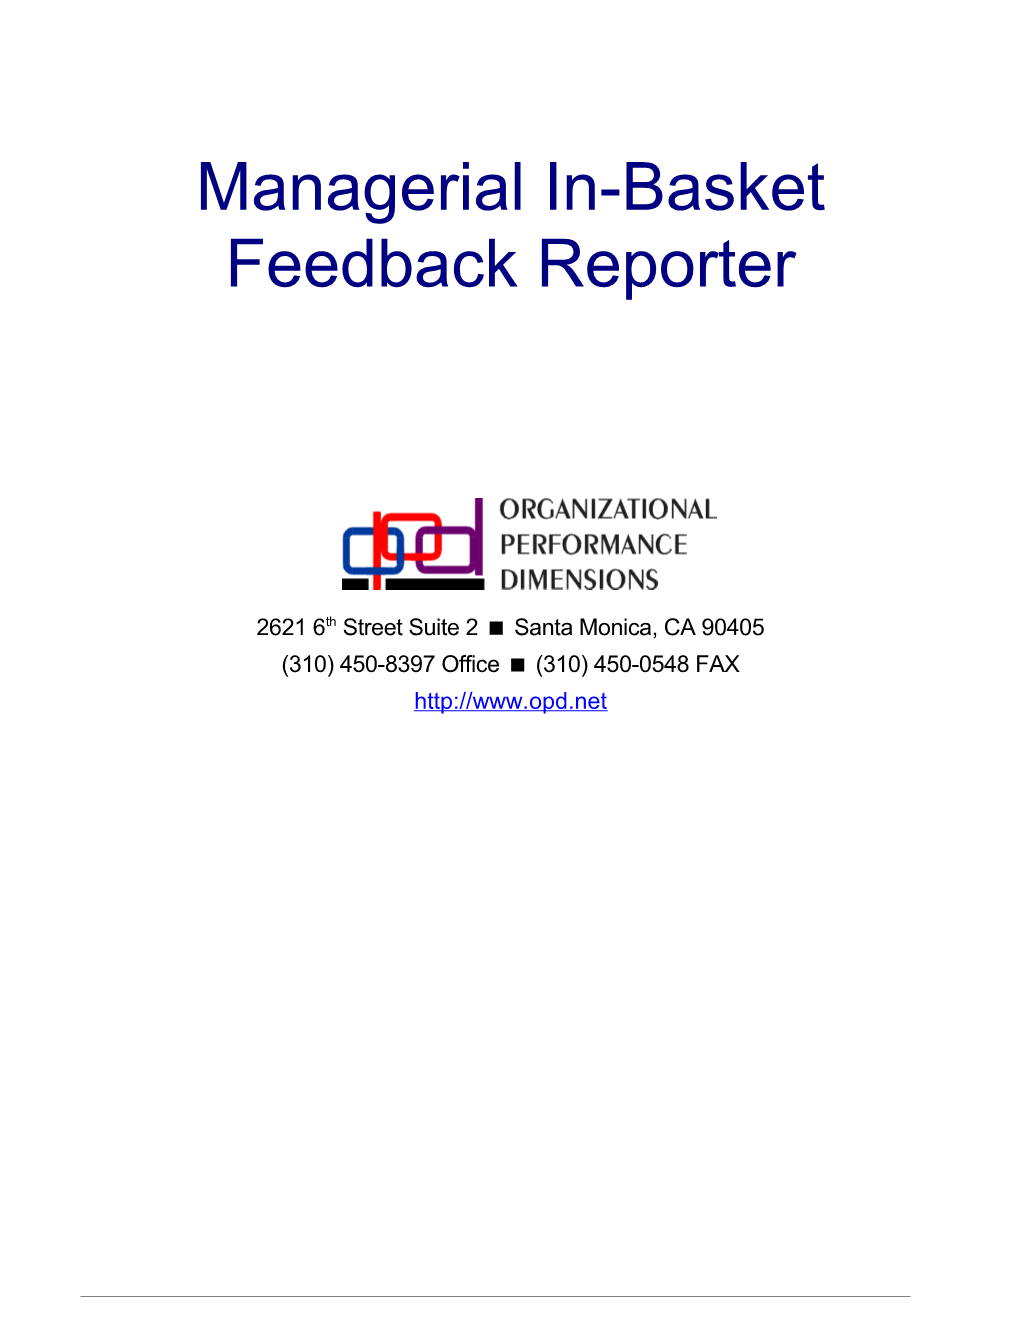 Managerial In-Basket Feedback Reporter